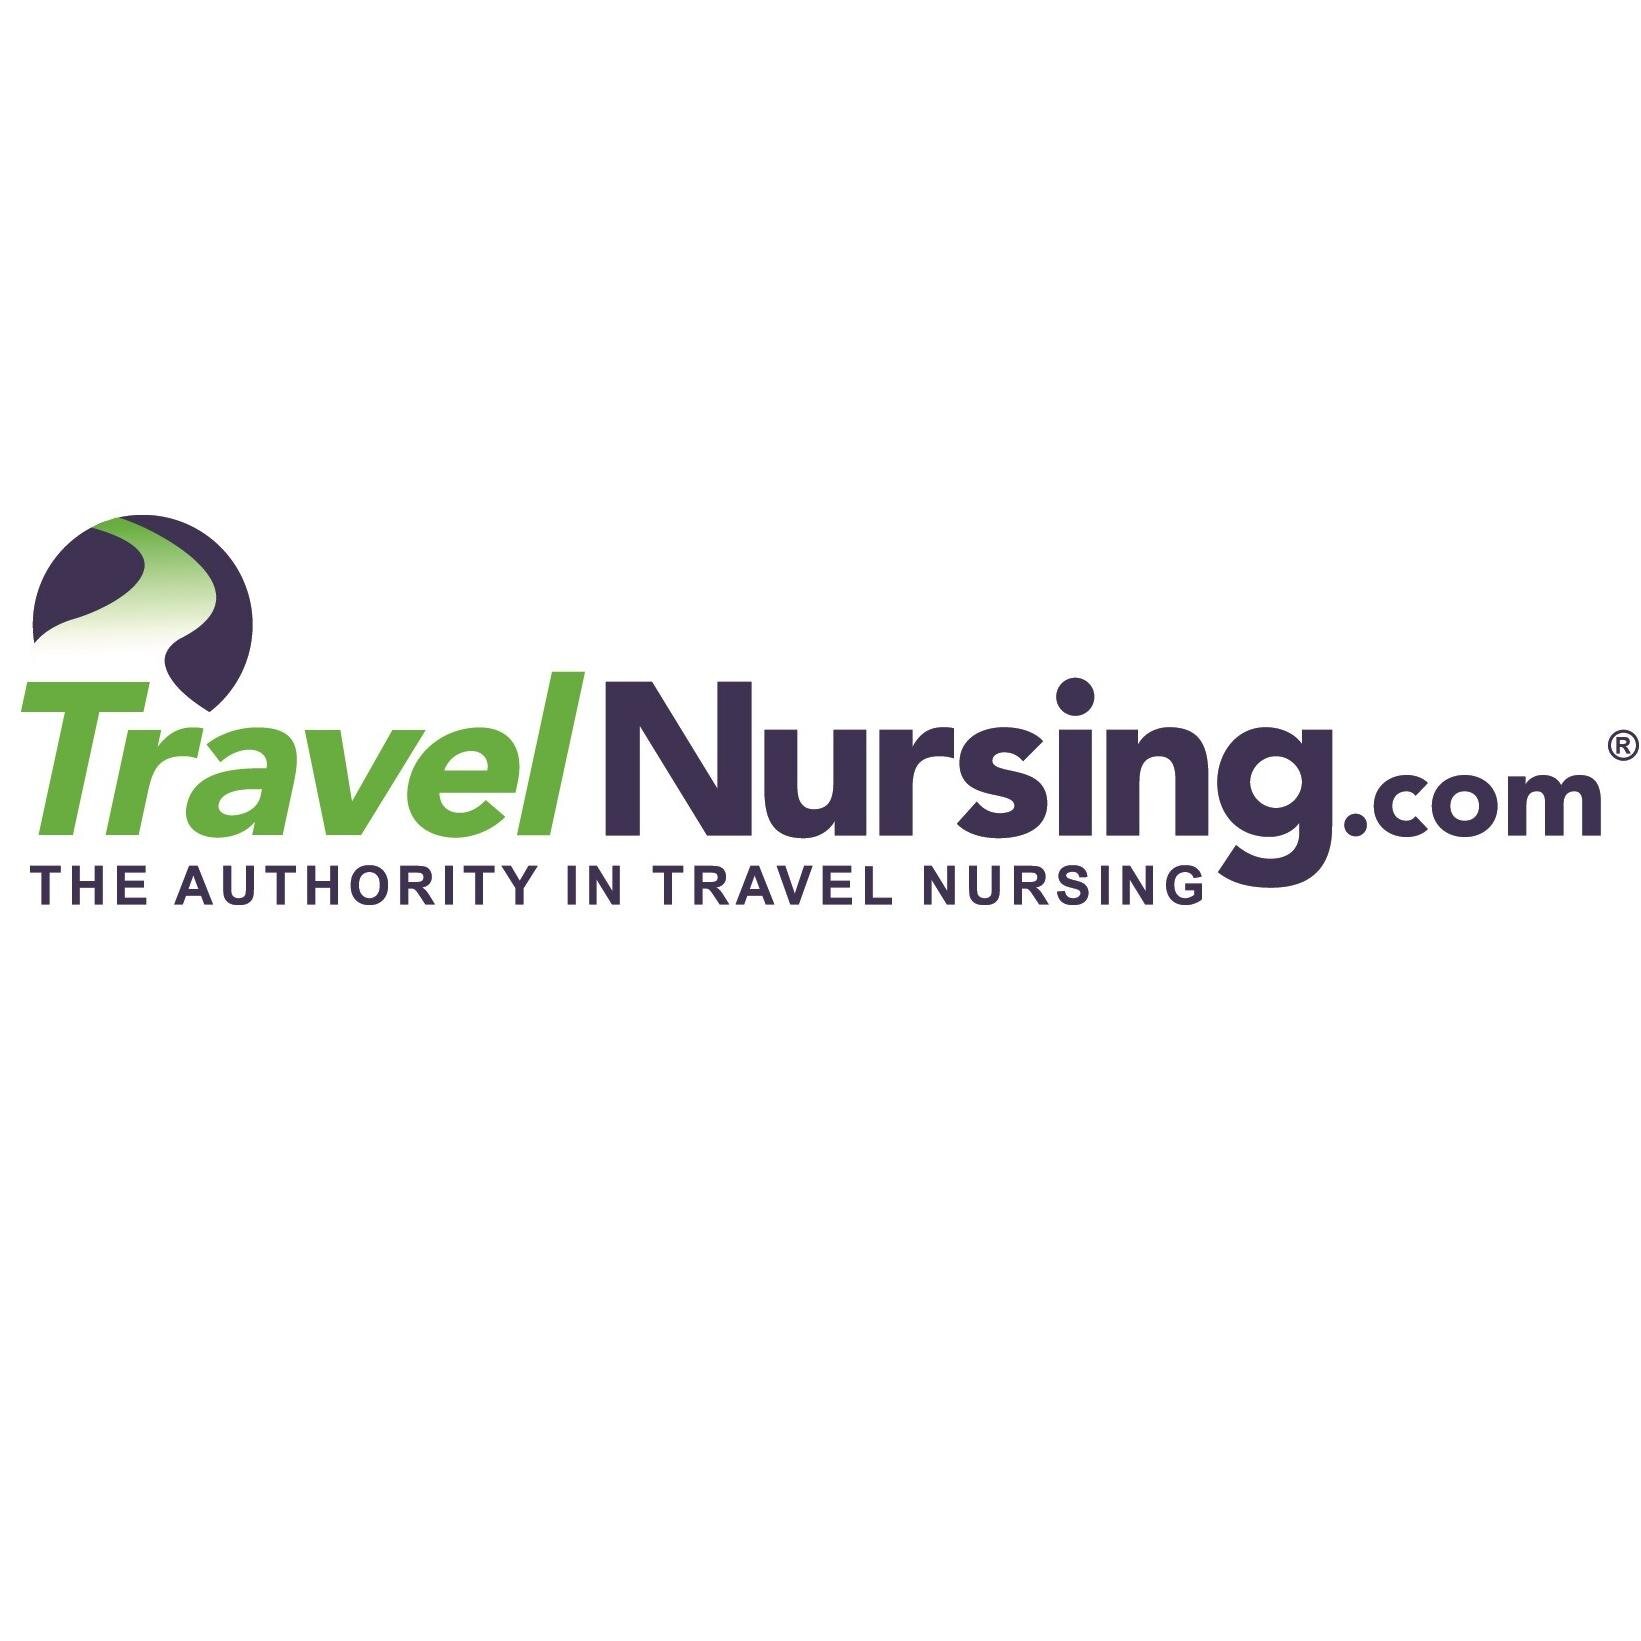 The industry recognized authority on #travelnursing. Follow us for the latest #nursing #jobs across the U.S.. Where can we take your #RN career next?